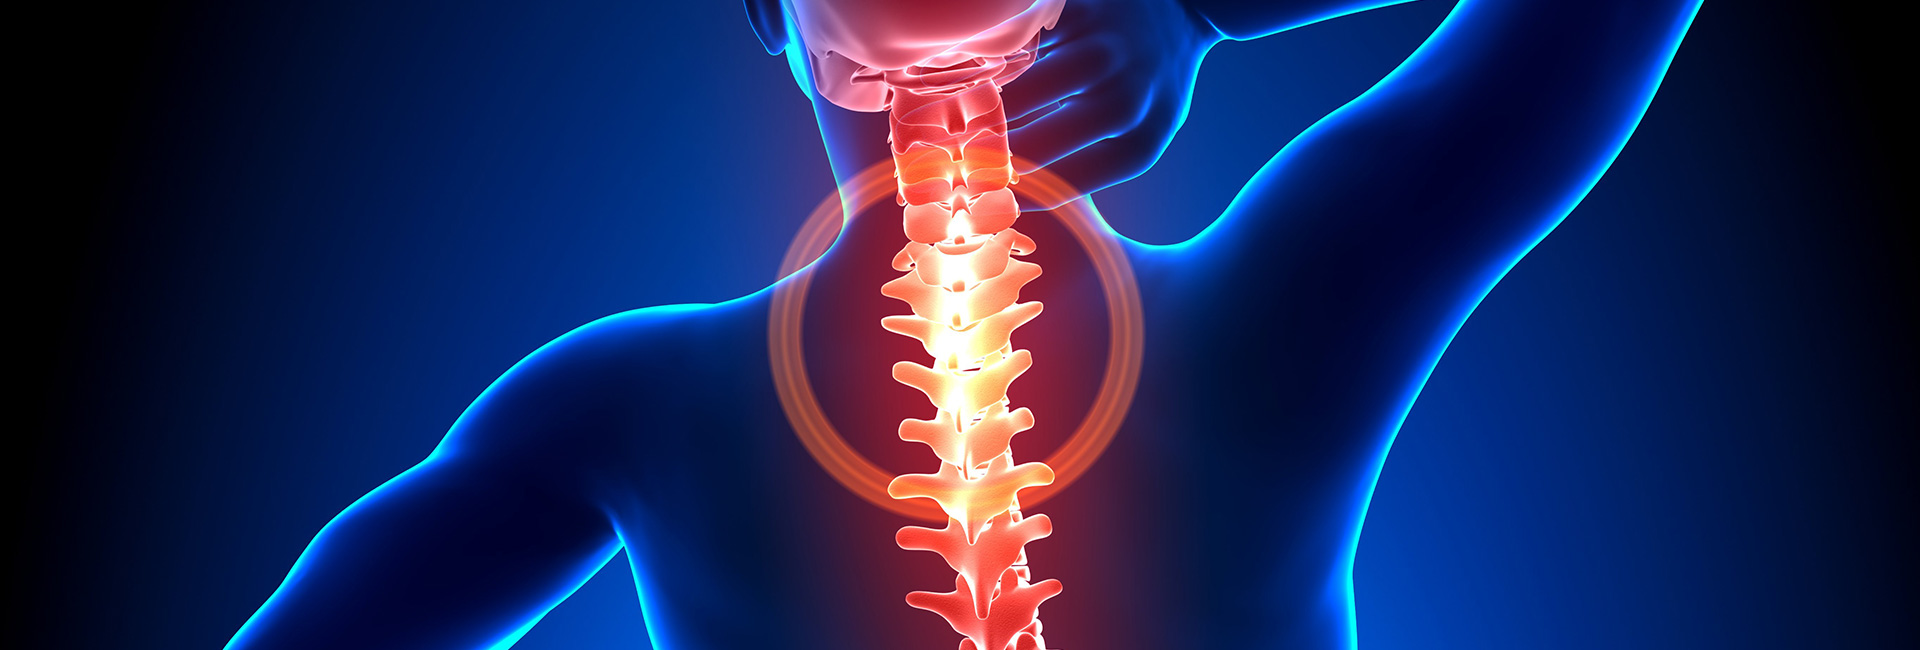 https://www.therapeuticassociates.com/wp-content/uploads/2021/05/Upper-Back-Pain-Popping-Treatment-Physical-Therapy.jpg